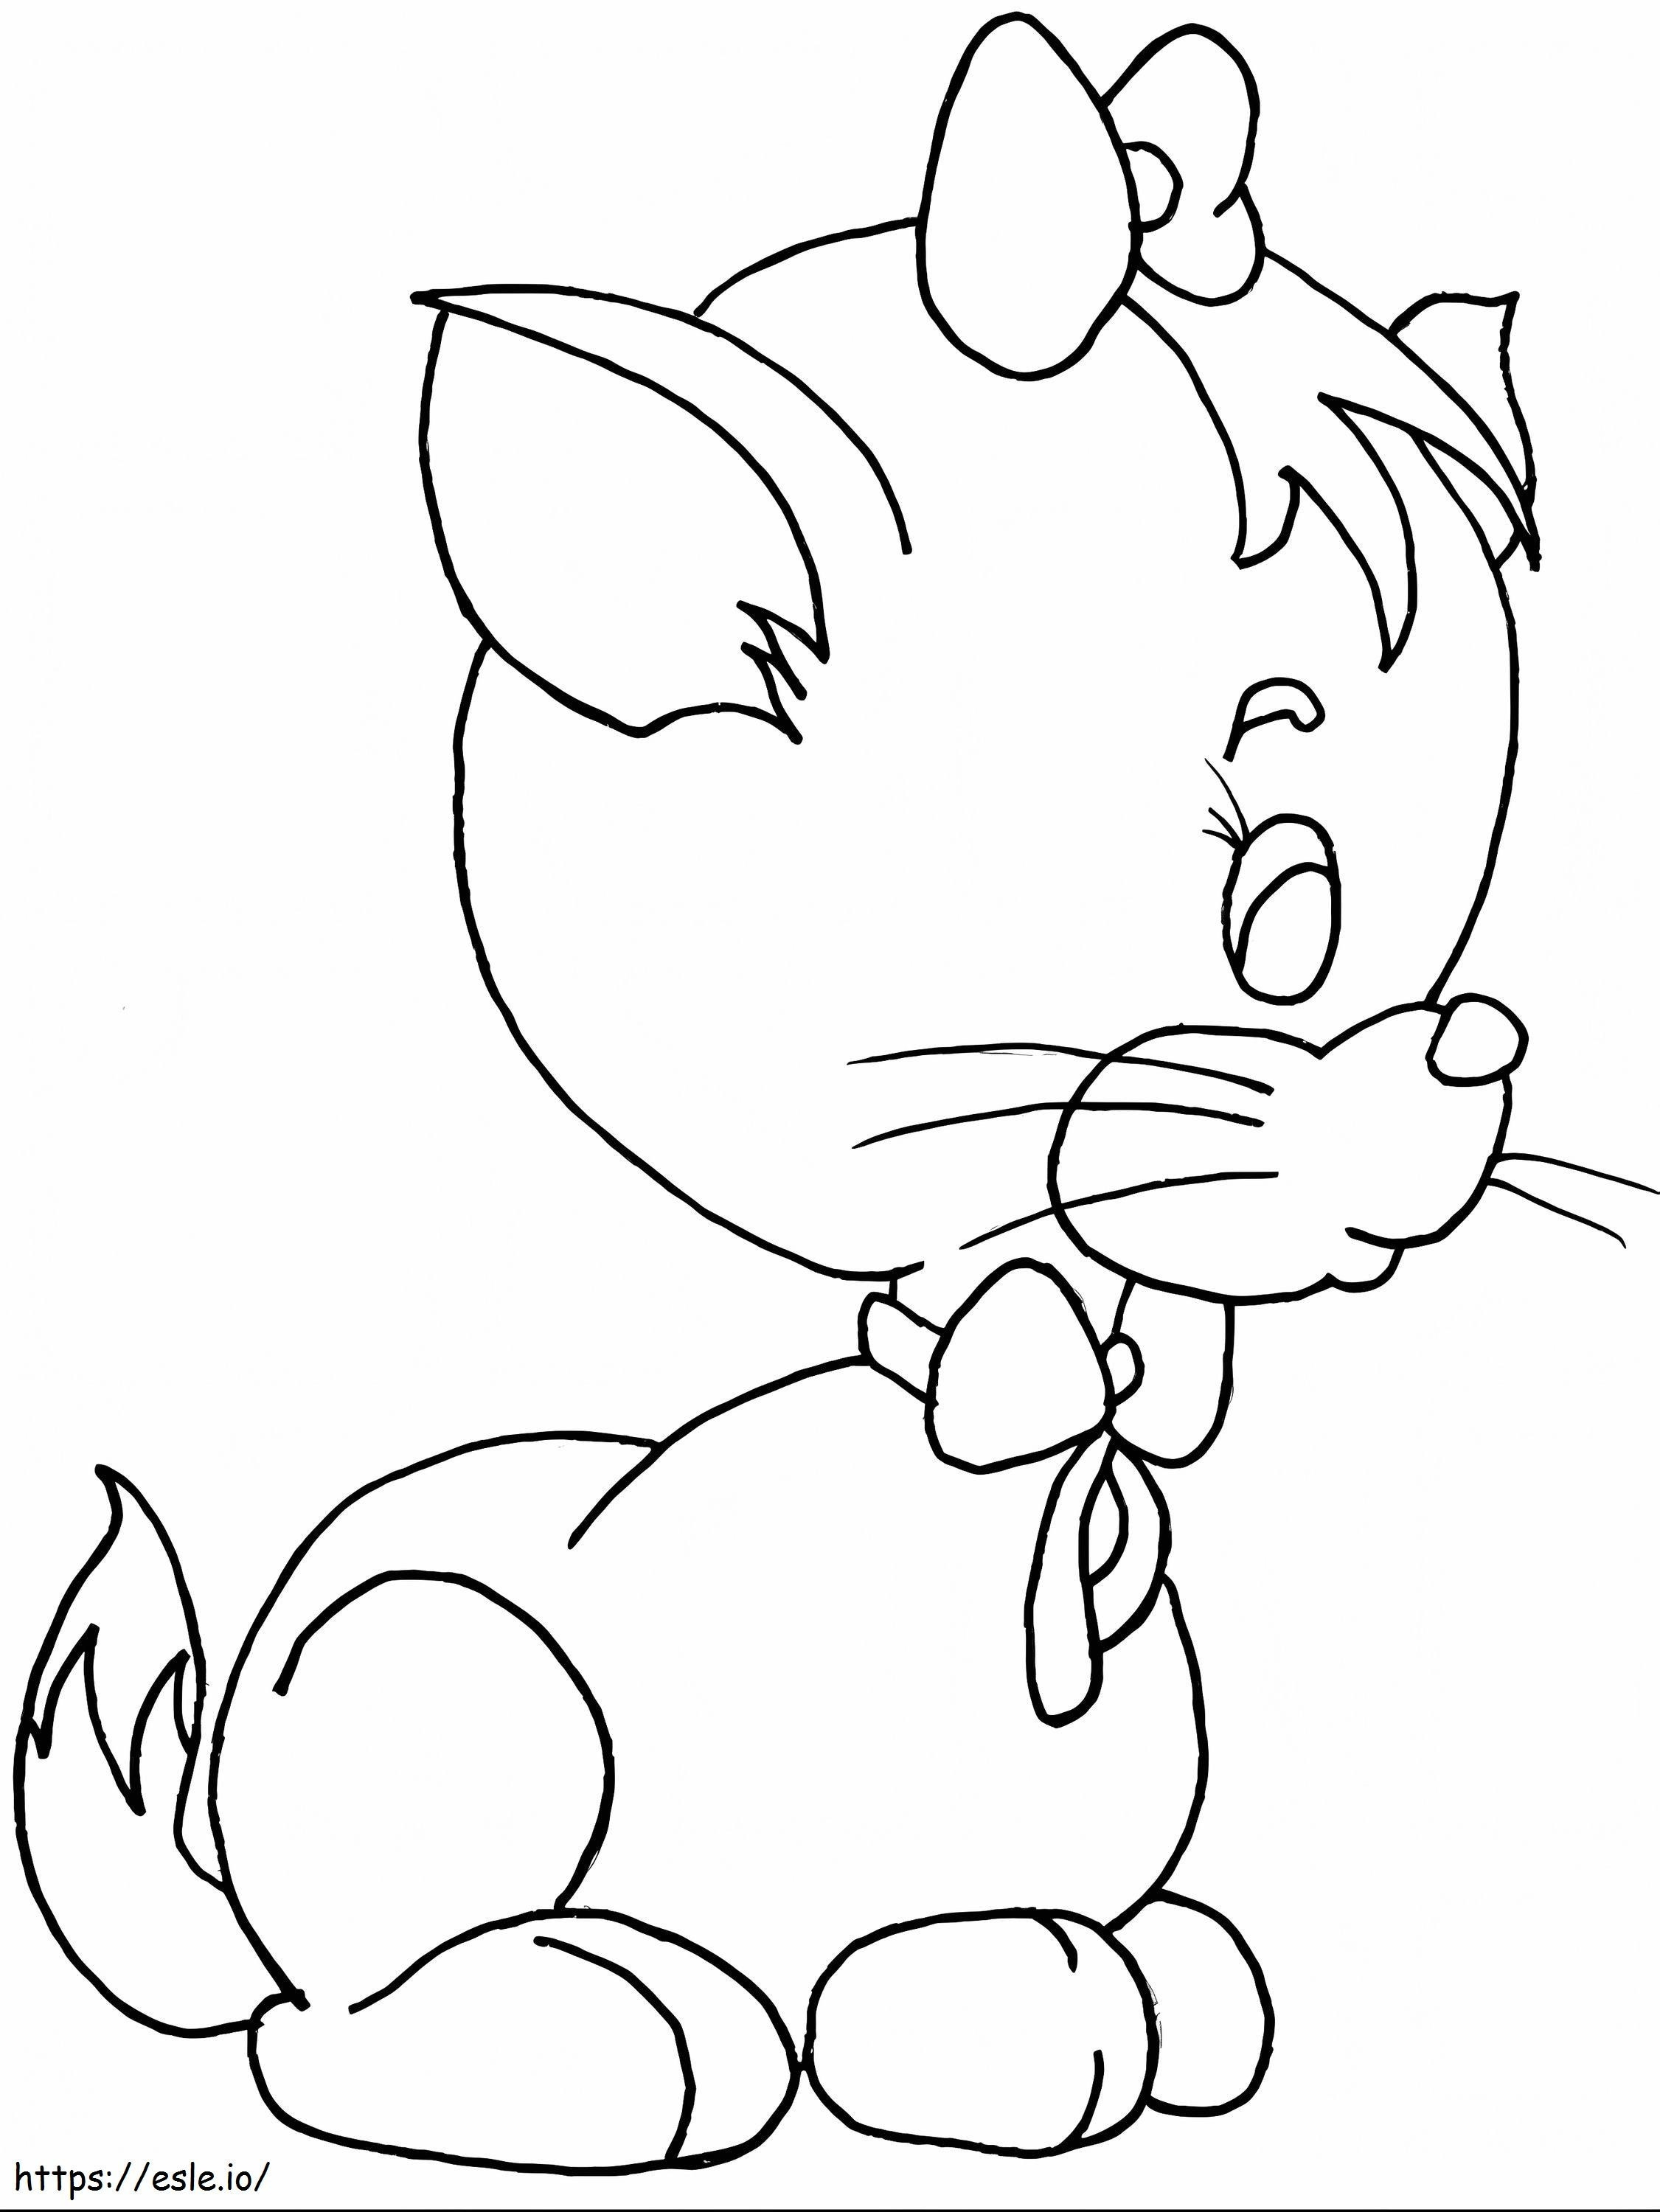 Kitten 1 coloring page